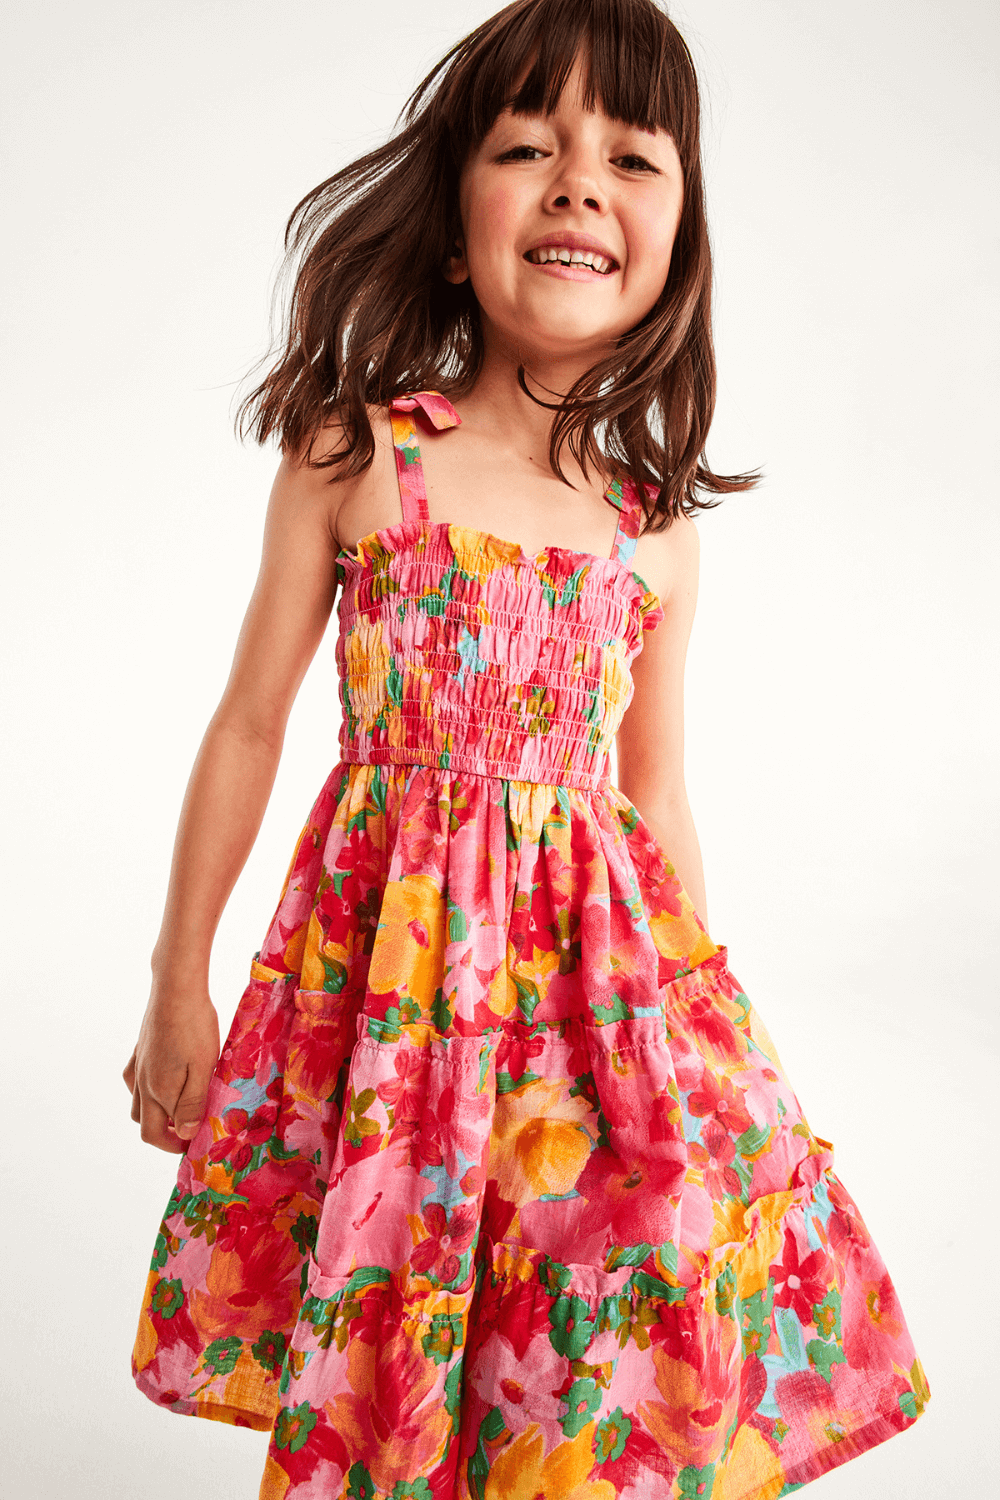 Child model in colourful party dress